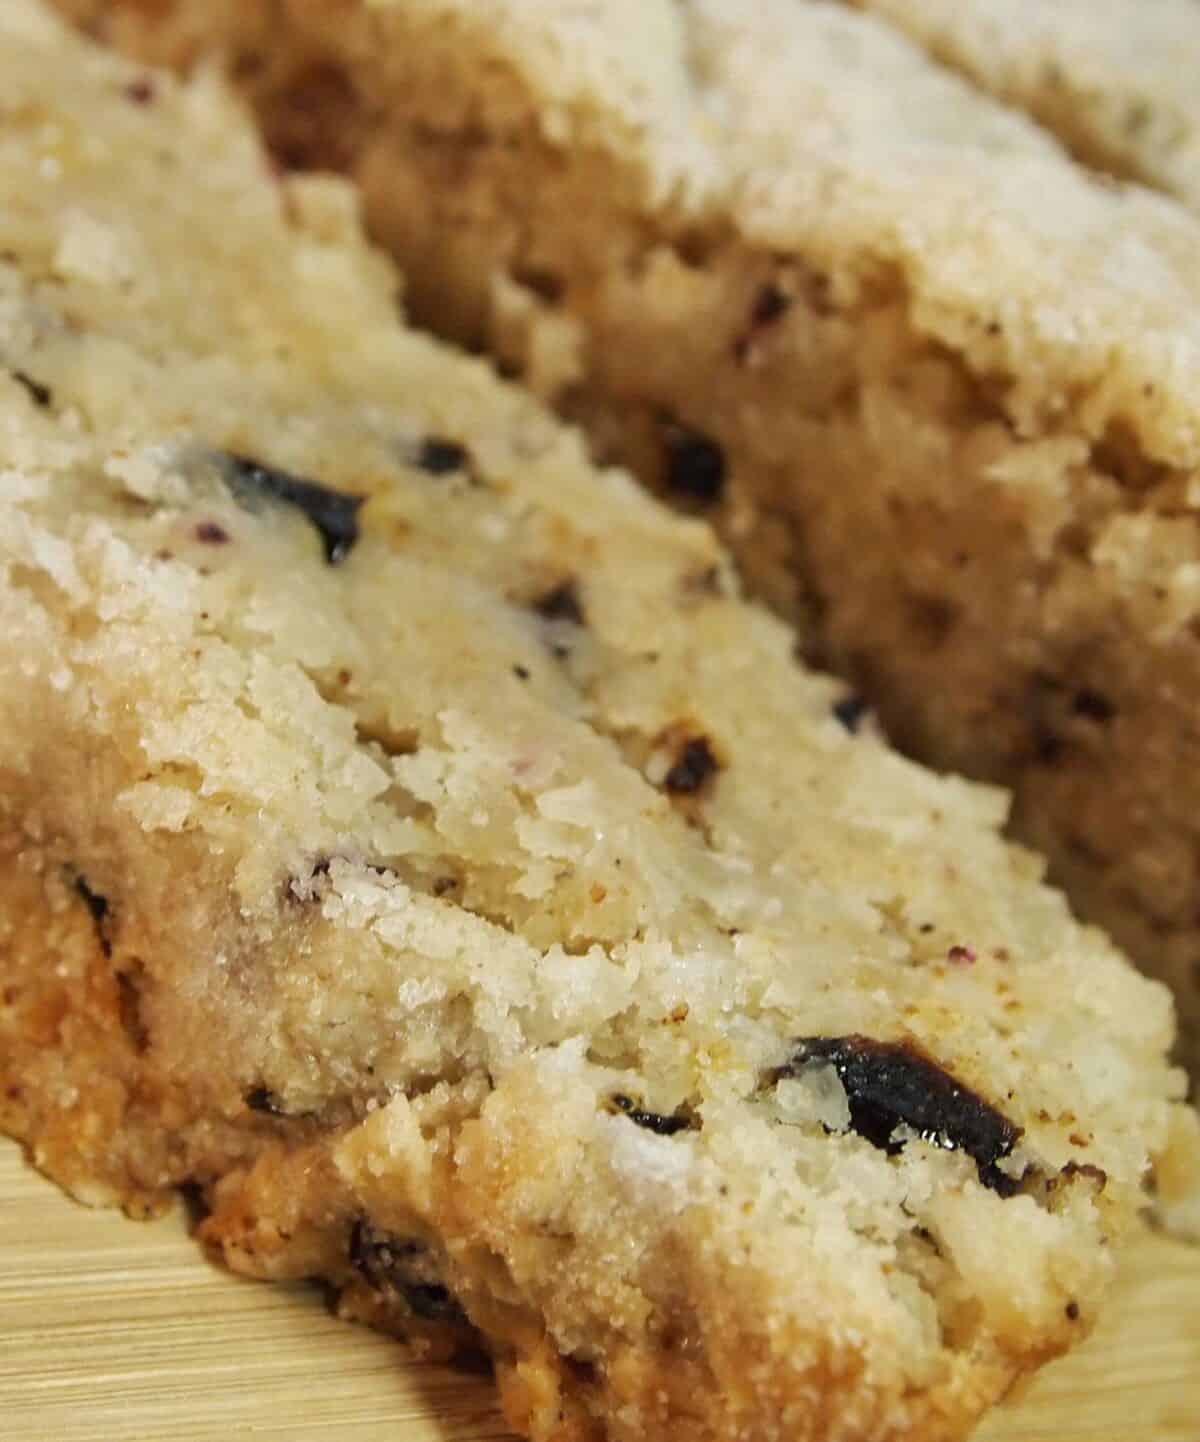  Can you smell the delicious aroma of our Bajan Sweet Bread?